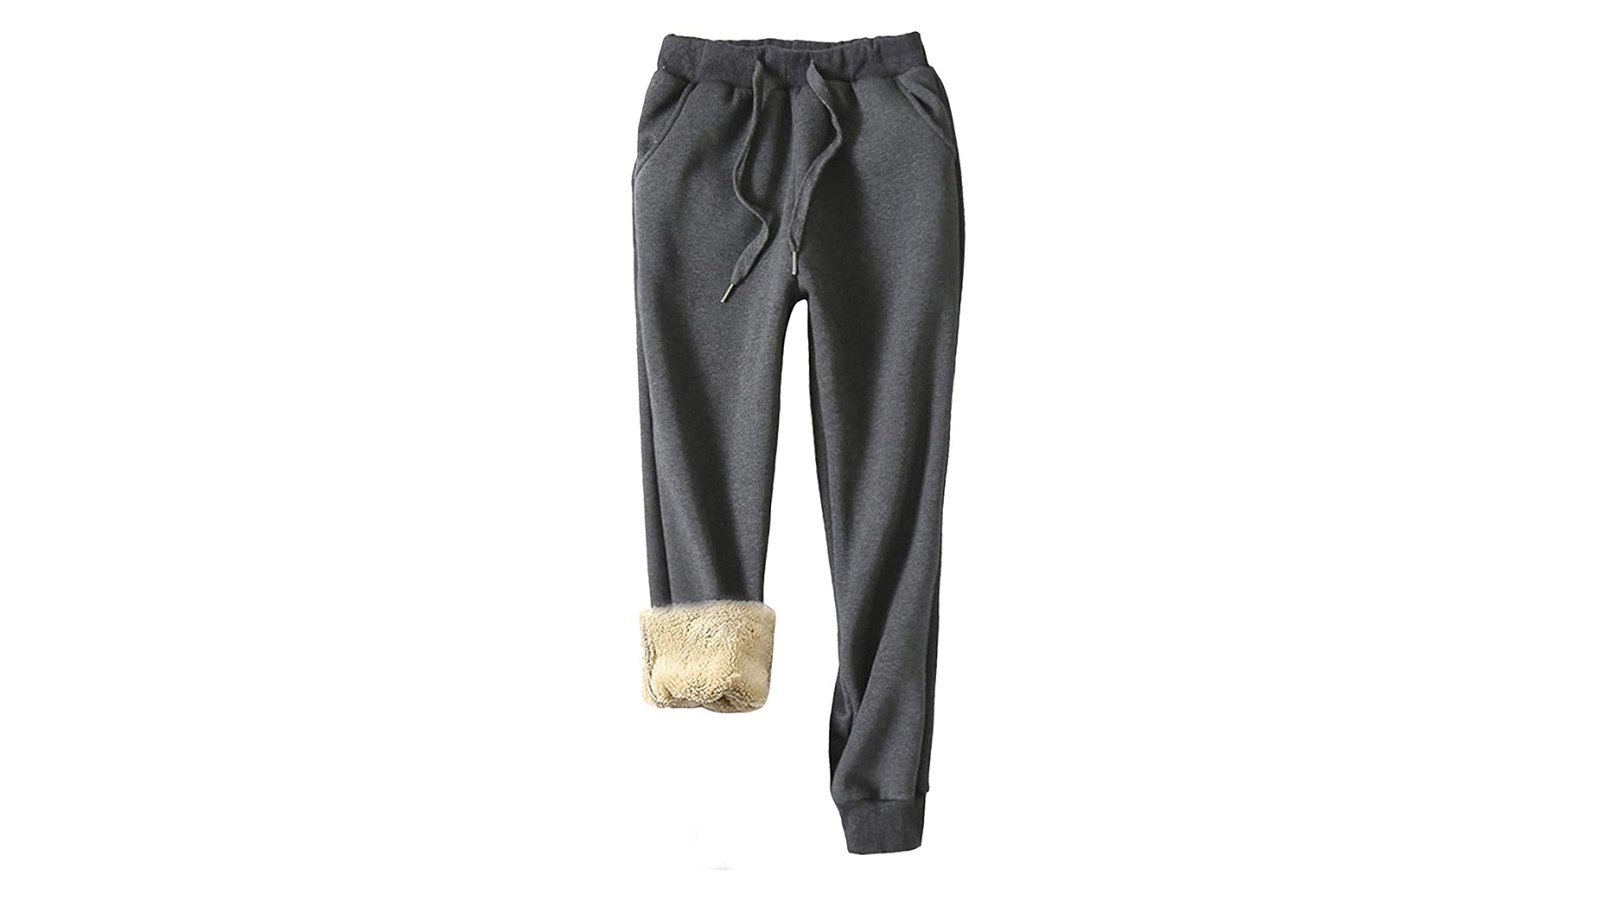 Yeokou Sherpa-Lined Joggers Take Comfort to the Extreme